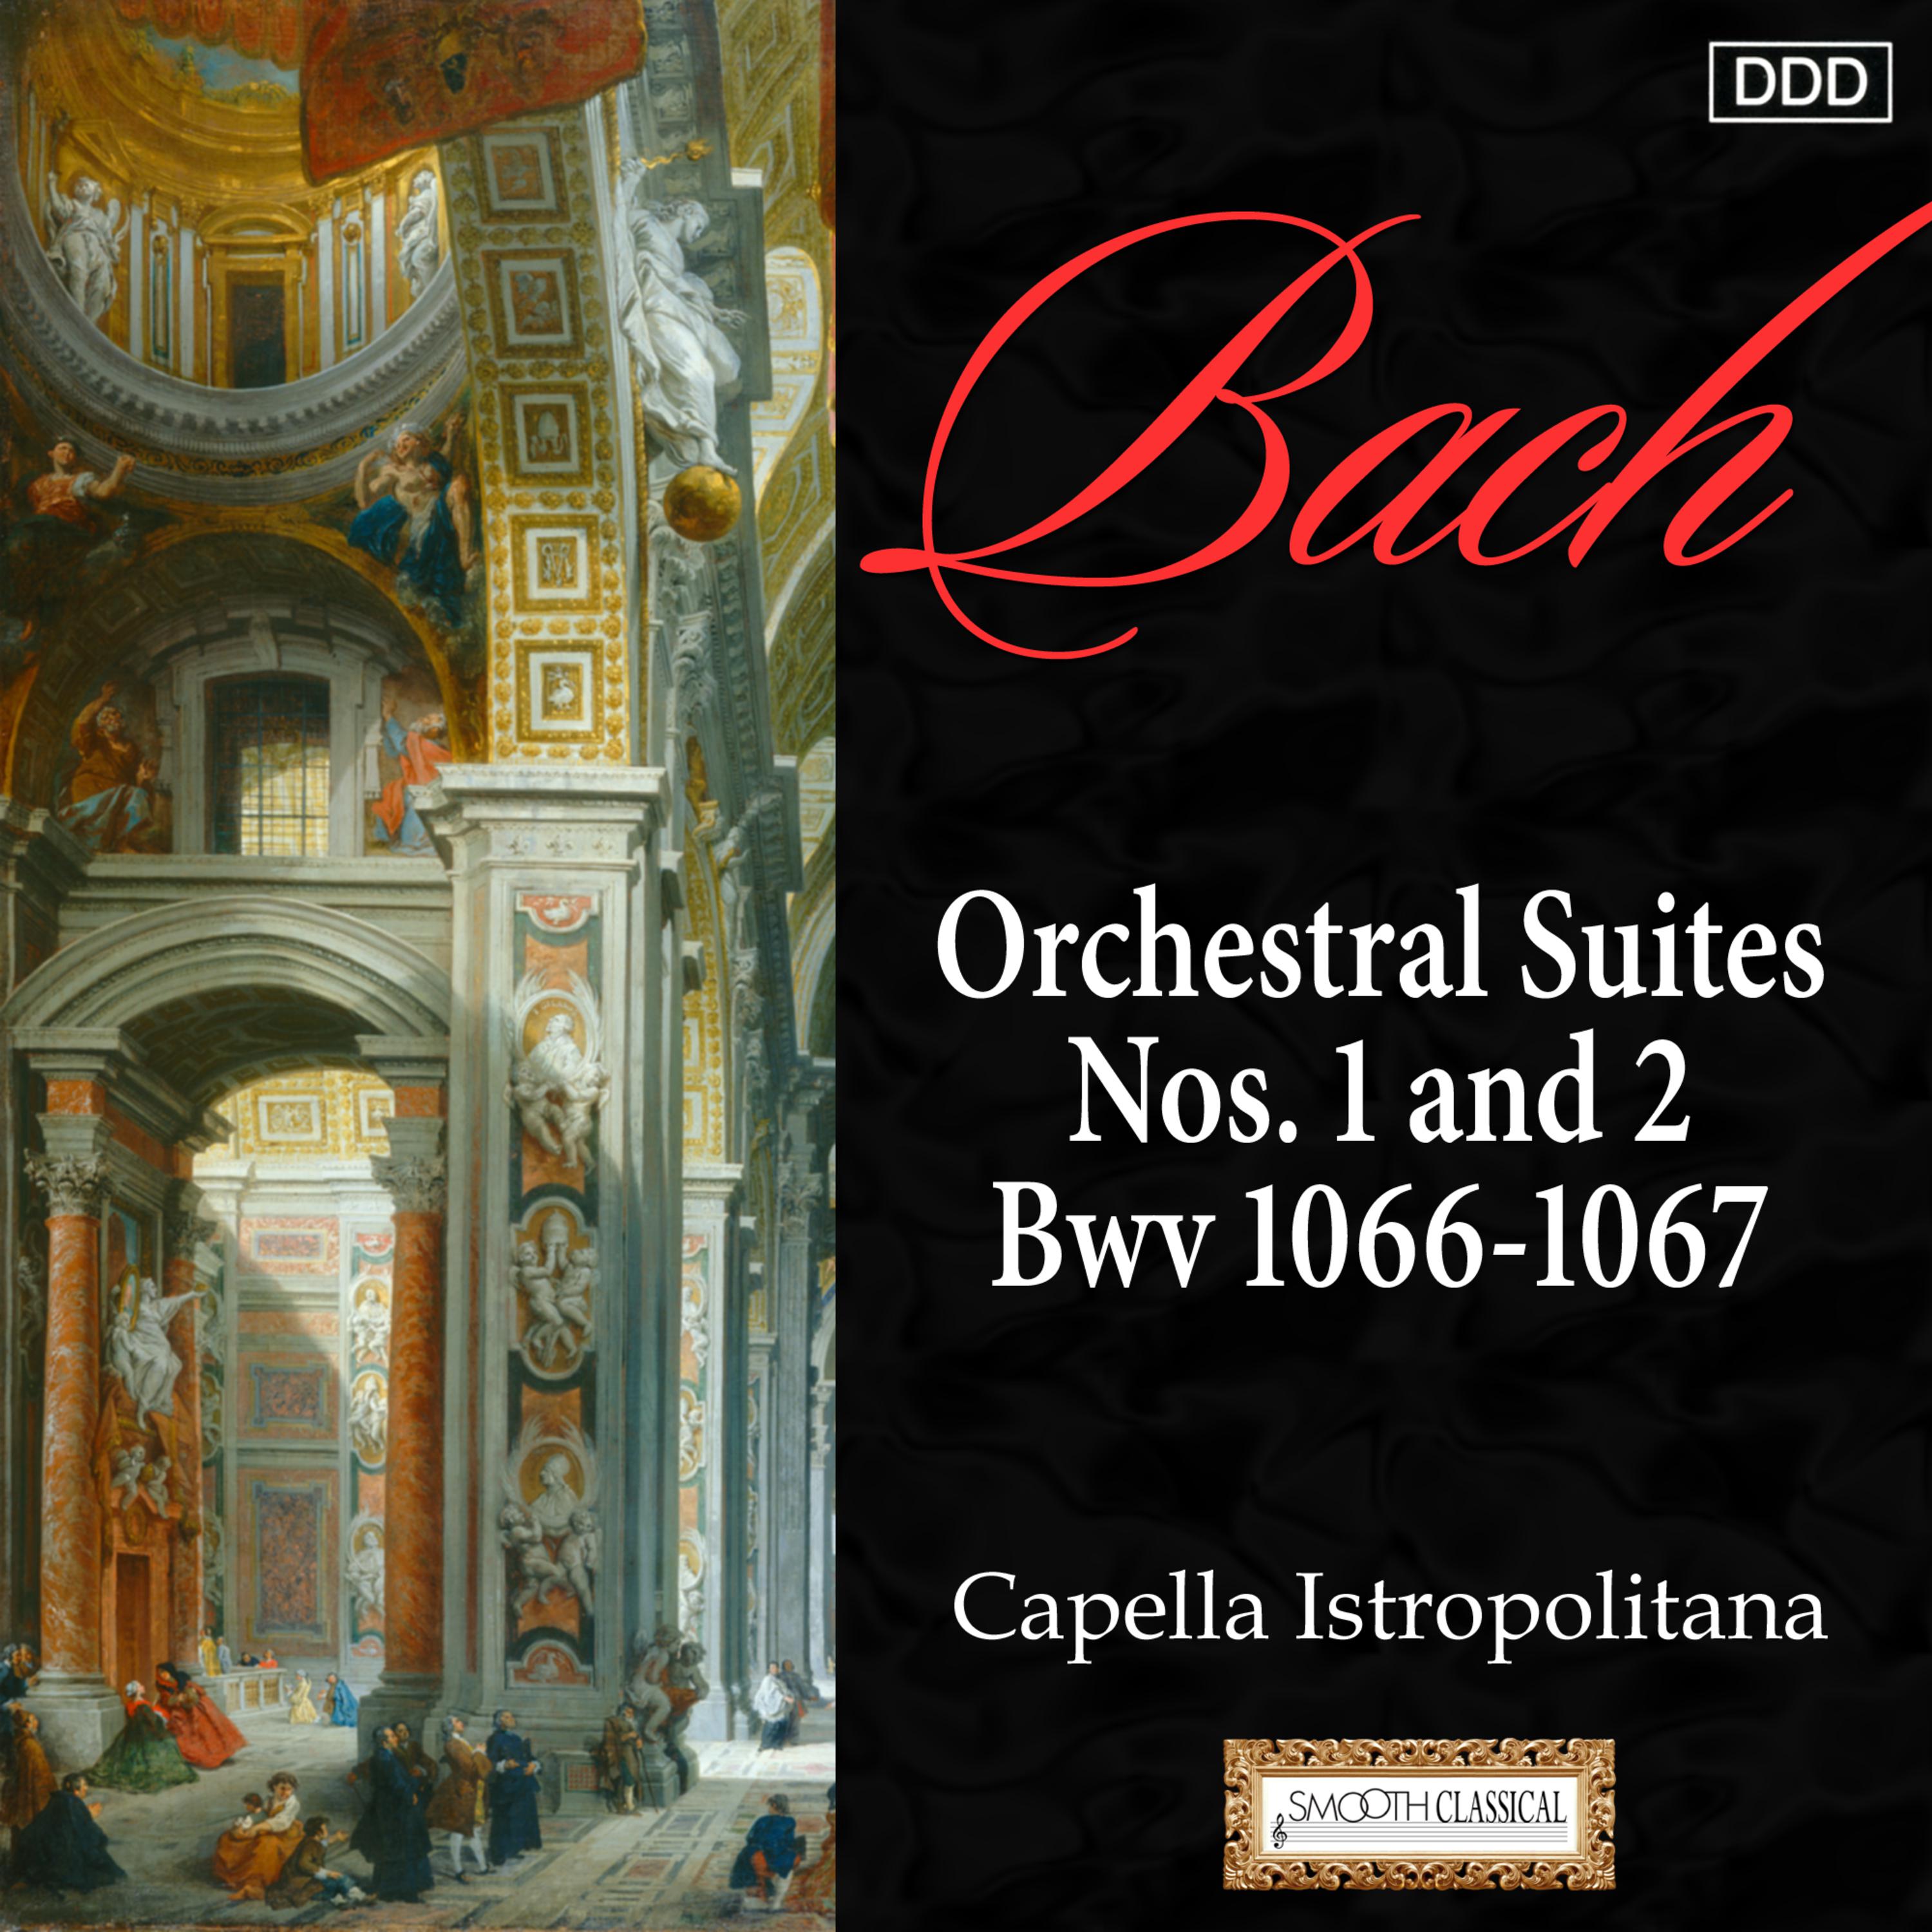 Orchestral Suite No. 1 in C Major, BWV 1066: VII. Passepied I and II